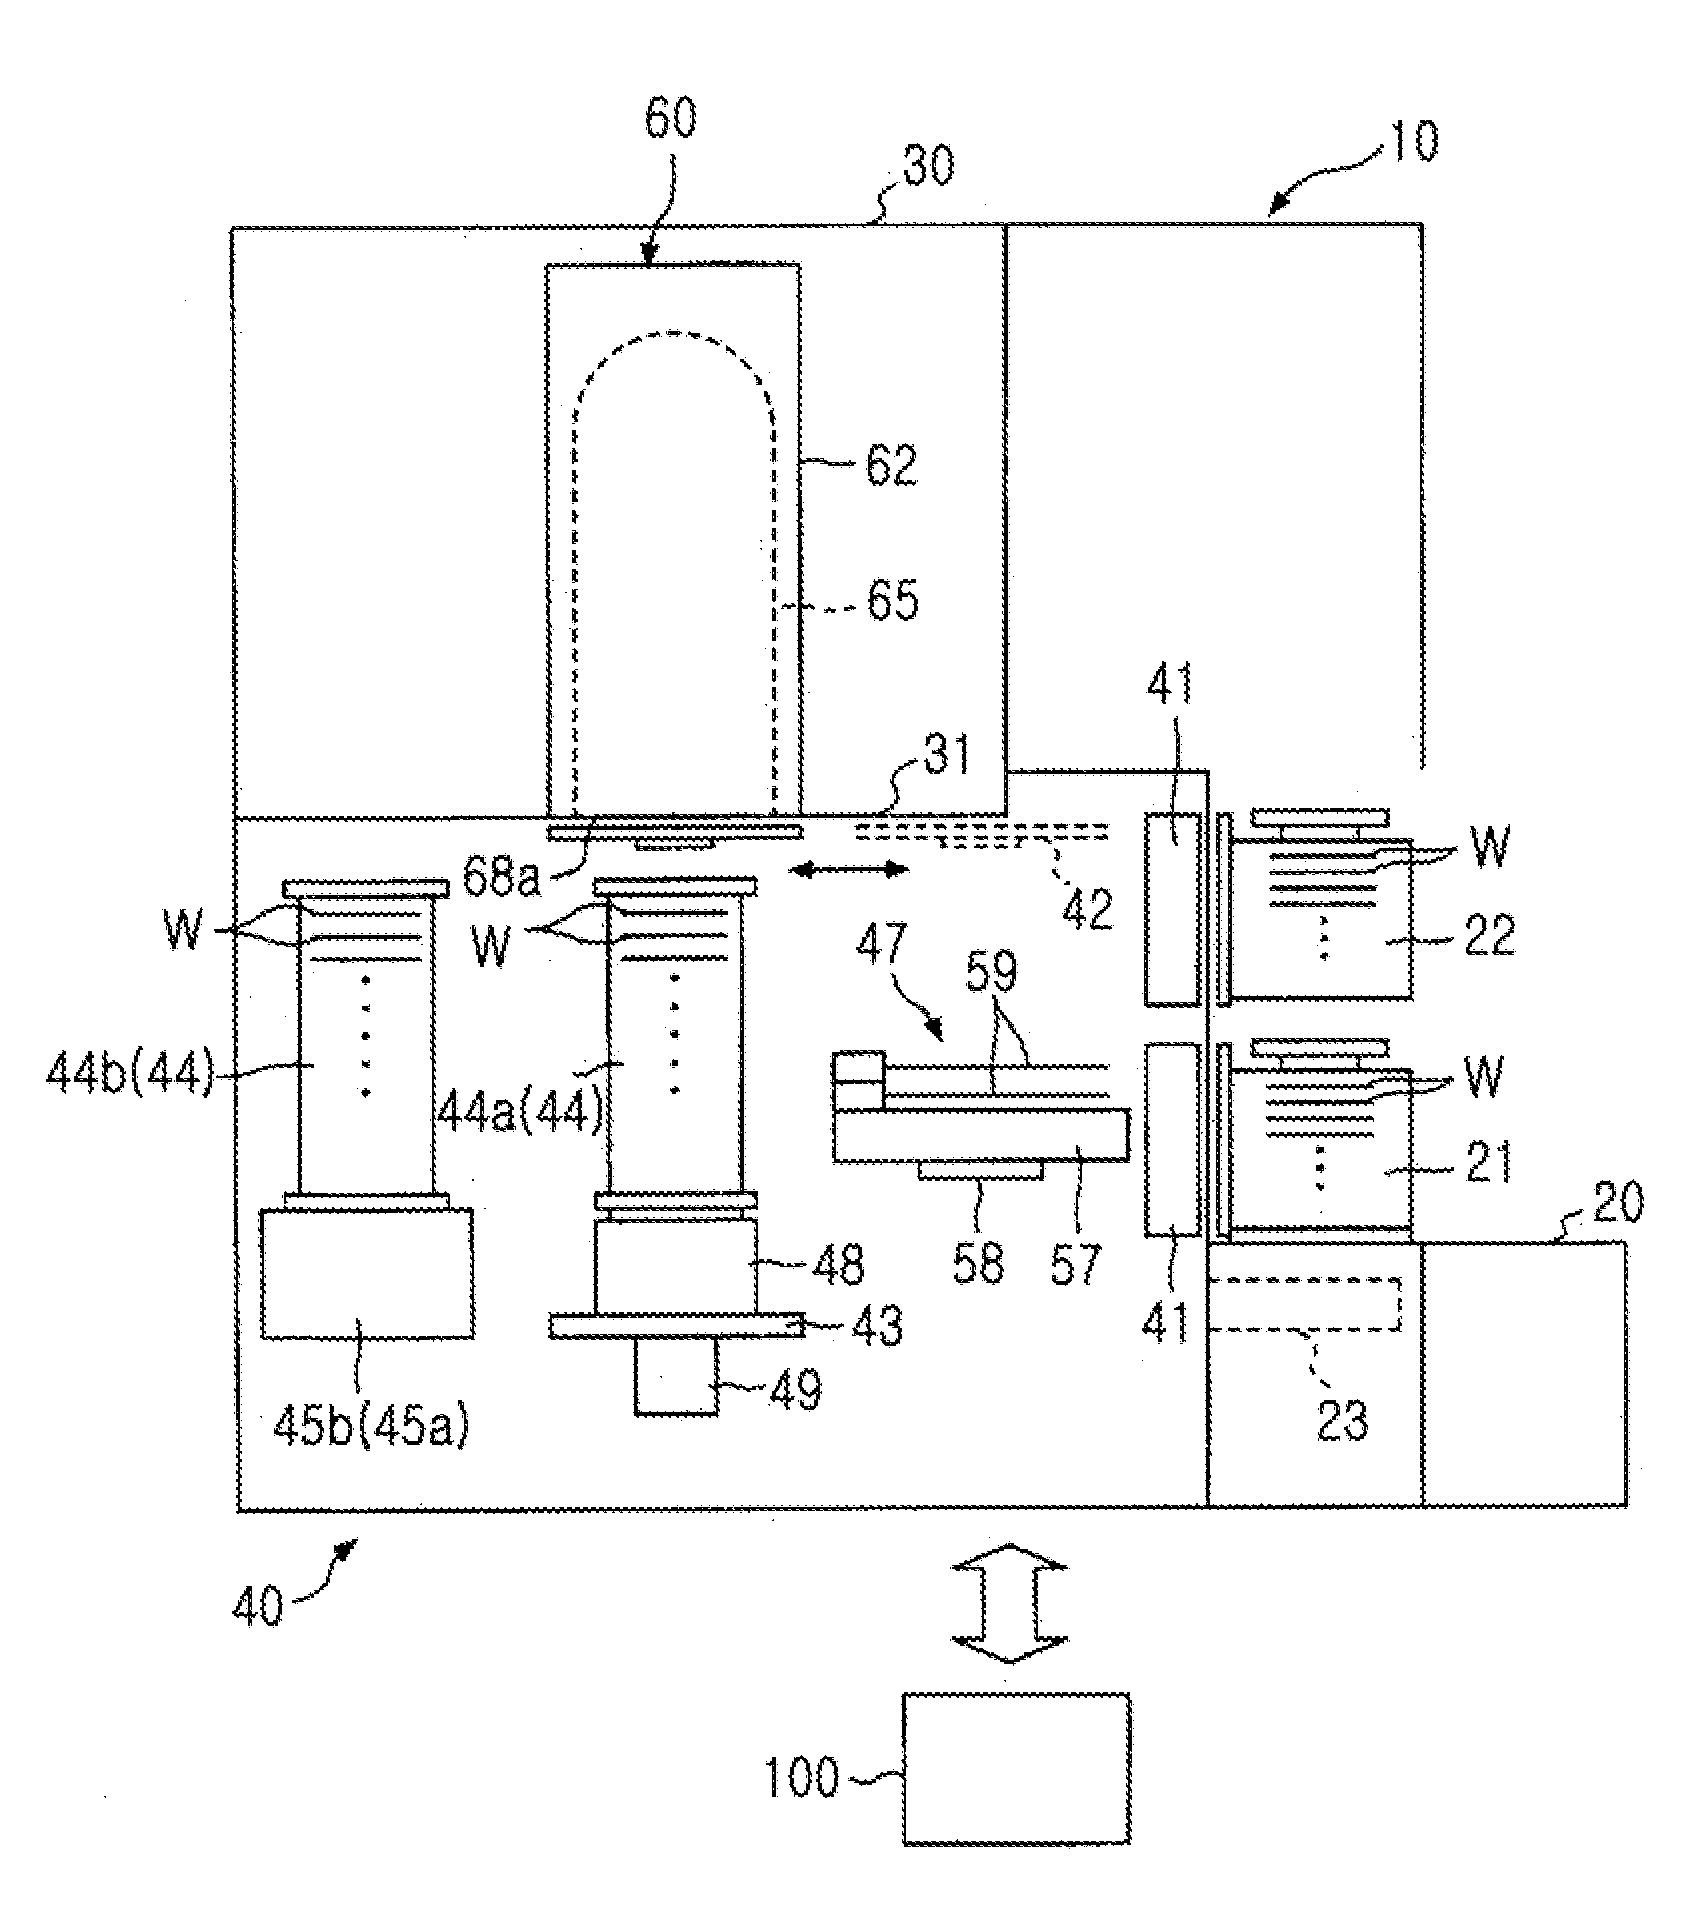 Thermal treatment apparatus, temperature control system, thermal treatment method, temperature control method, and non-transitory computer readable medium embodied with program for executing the thermal treatment method or the temperature control method